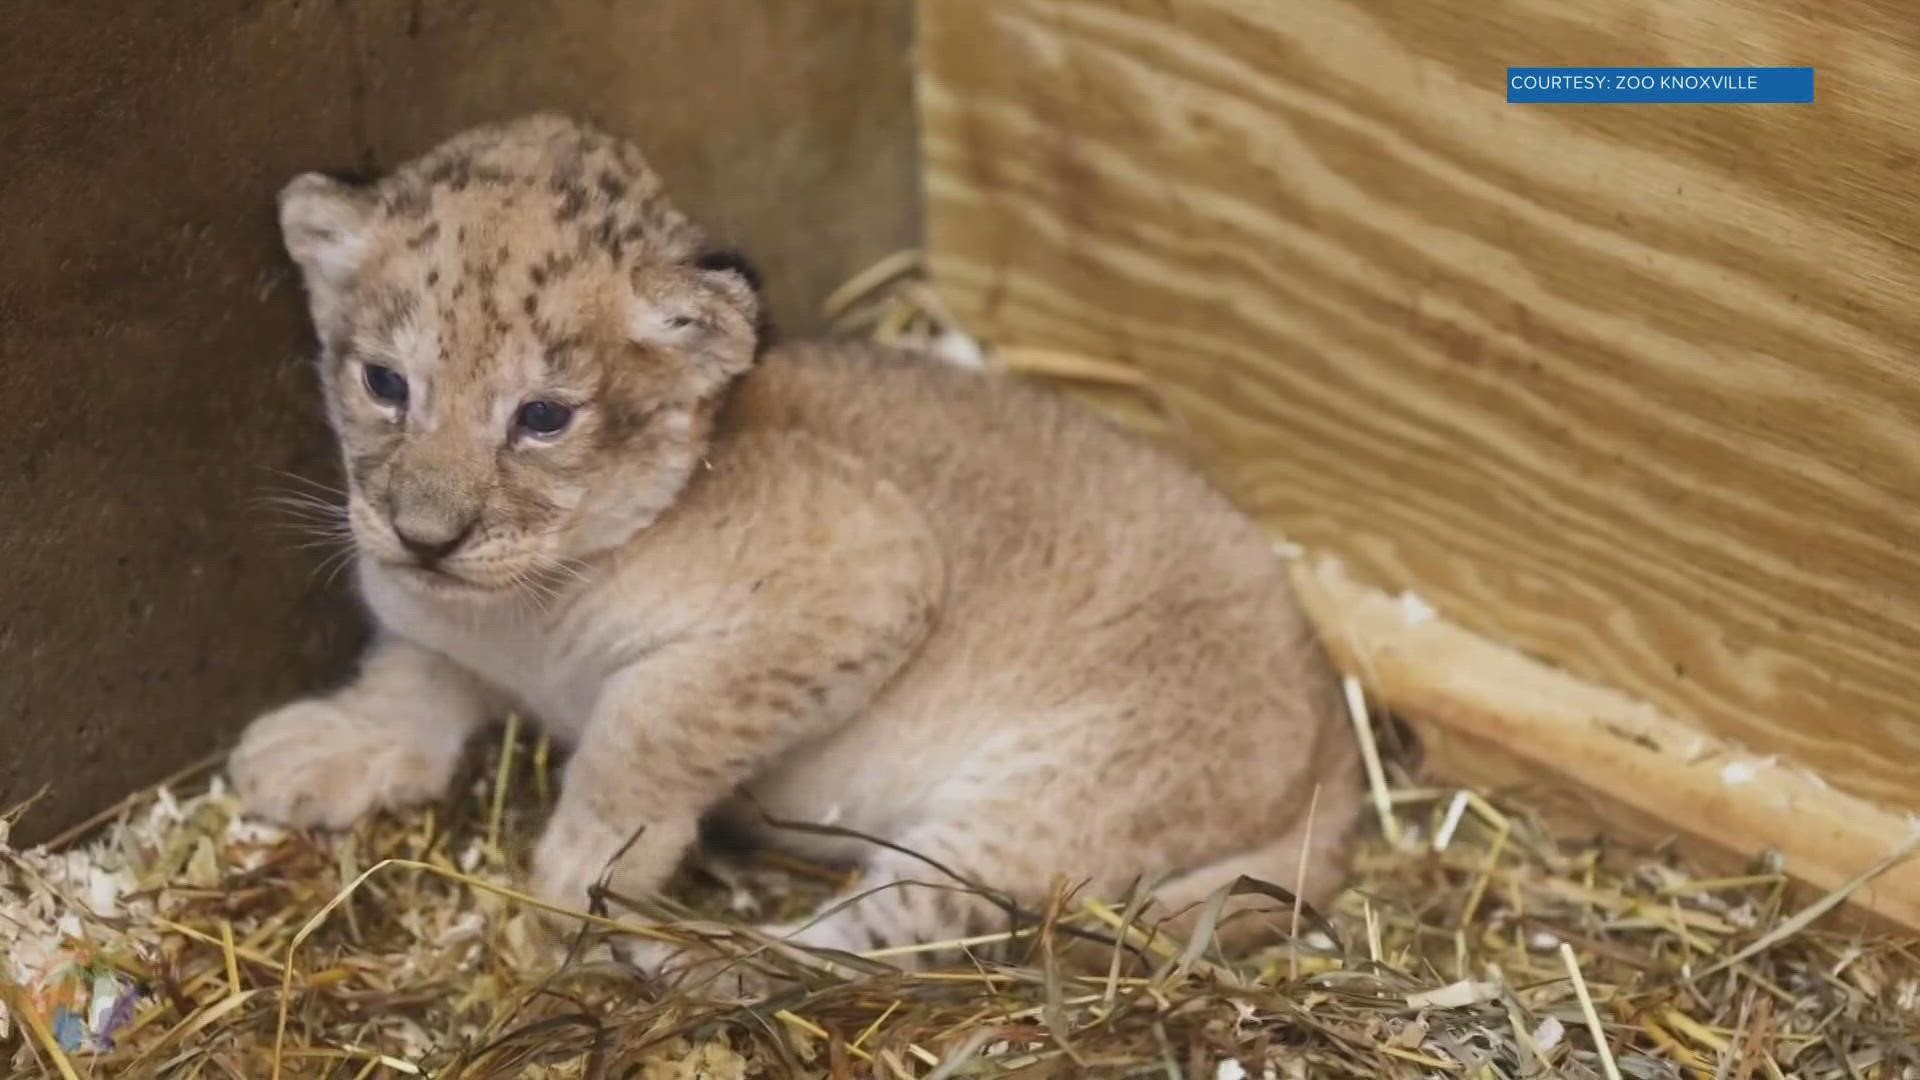 The lion cub was fatally injured by her mother when coming out of anesthesia, Zoo Knoxville said.